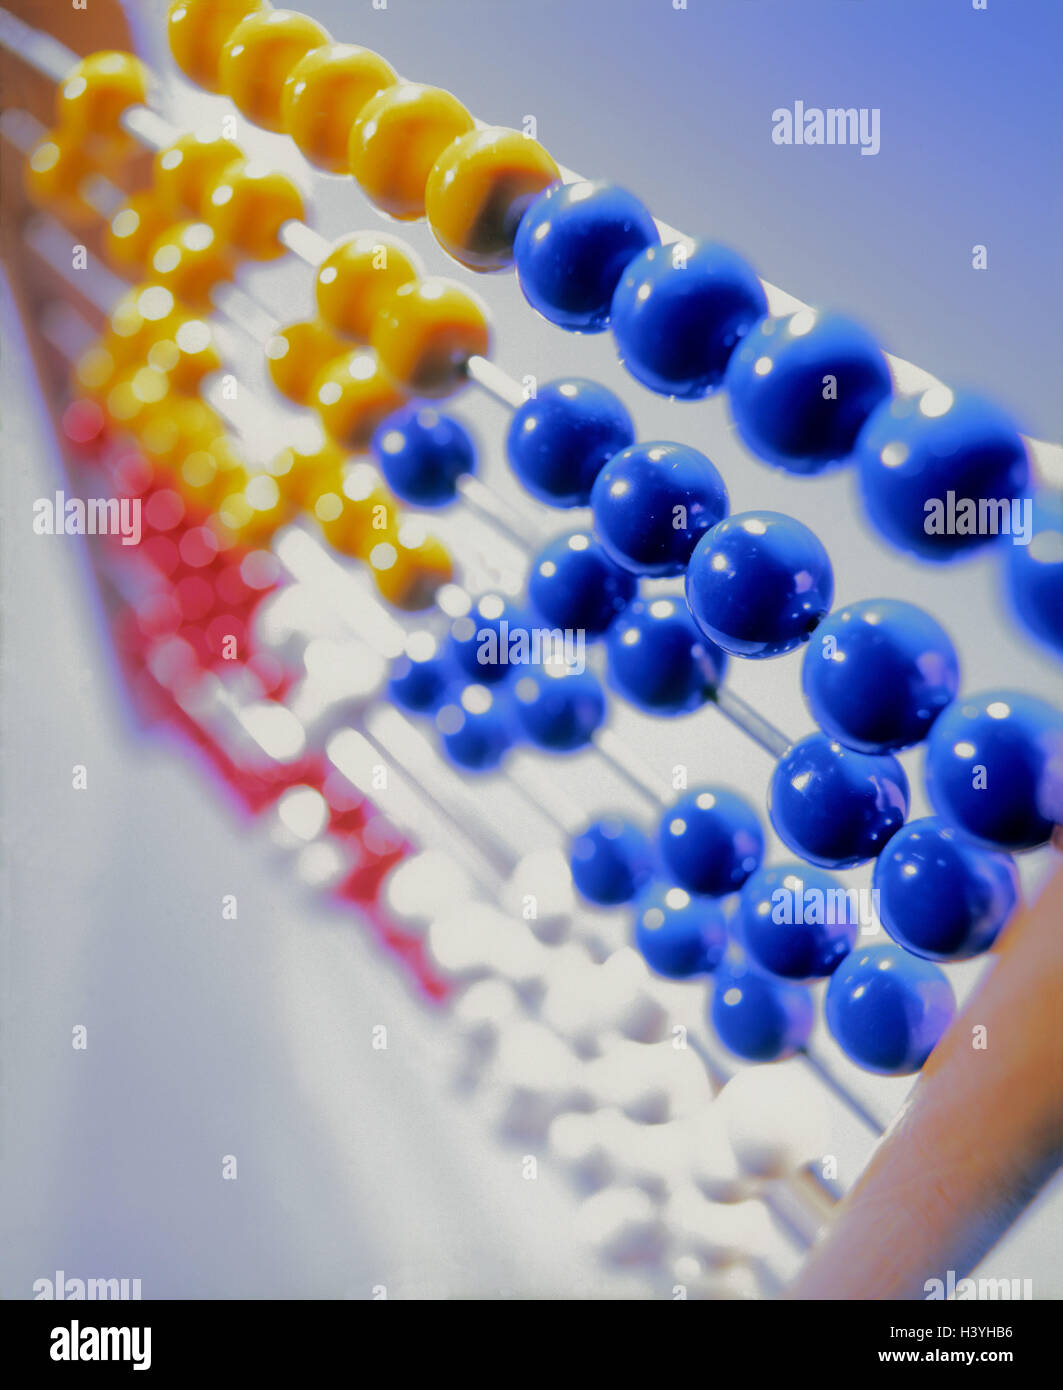 Abacus, close up, mathematics, slide rule, abacus, sphere, brightly, colourfully, addition, subtraction, detail, Still life, product photography, studio Stock Photo